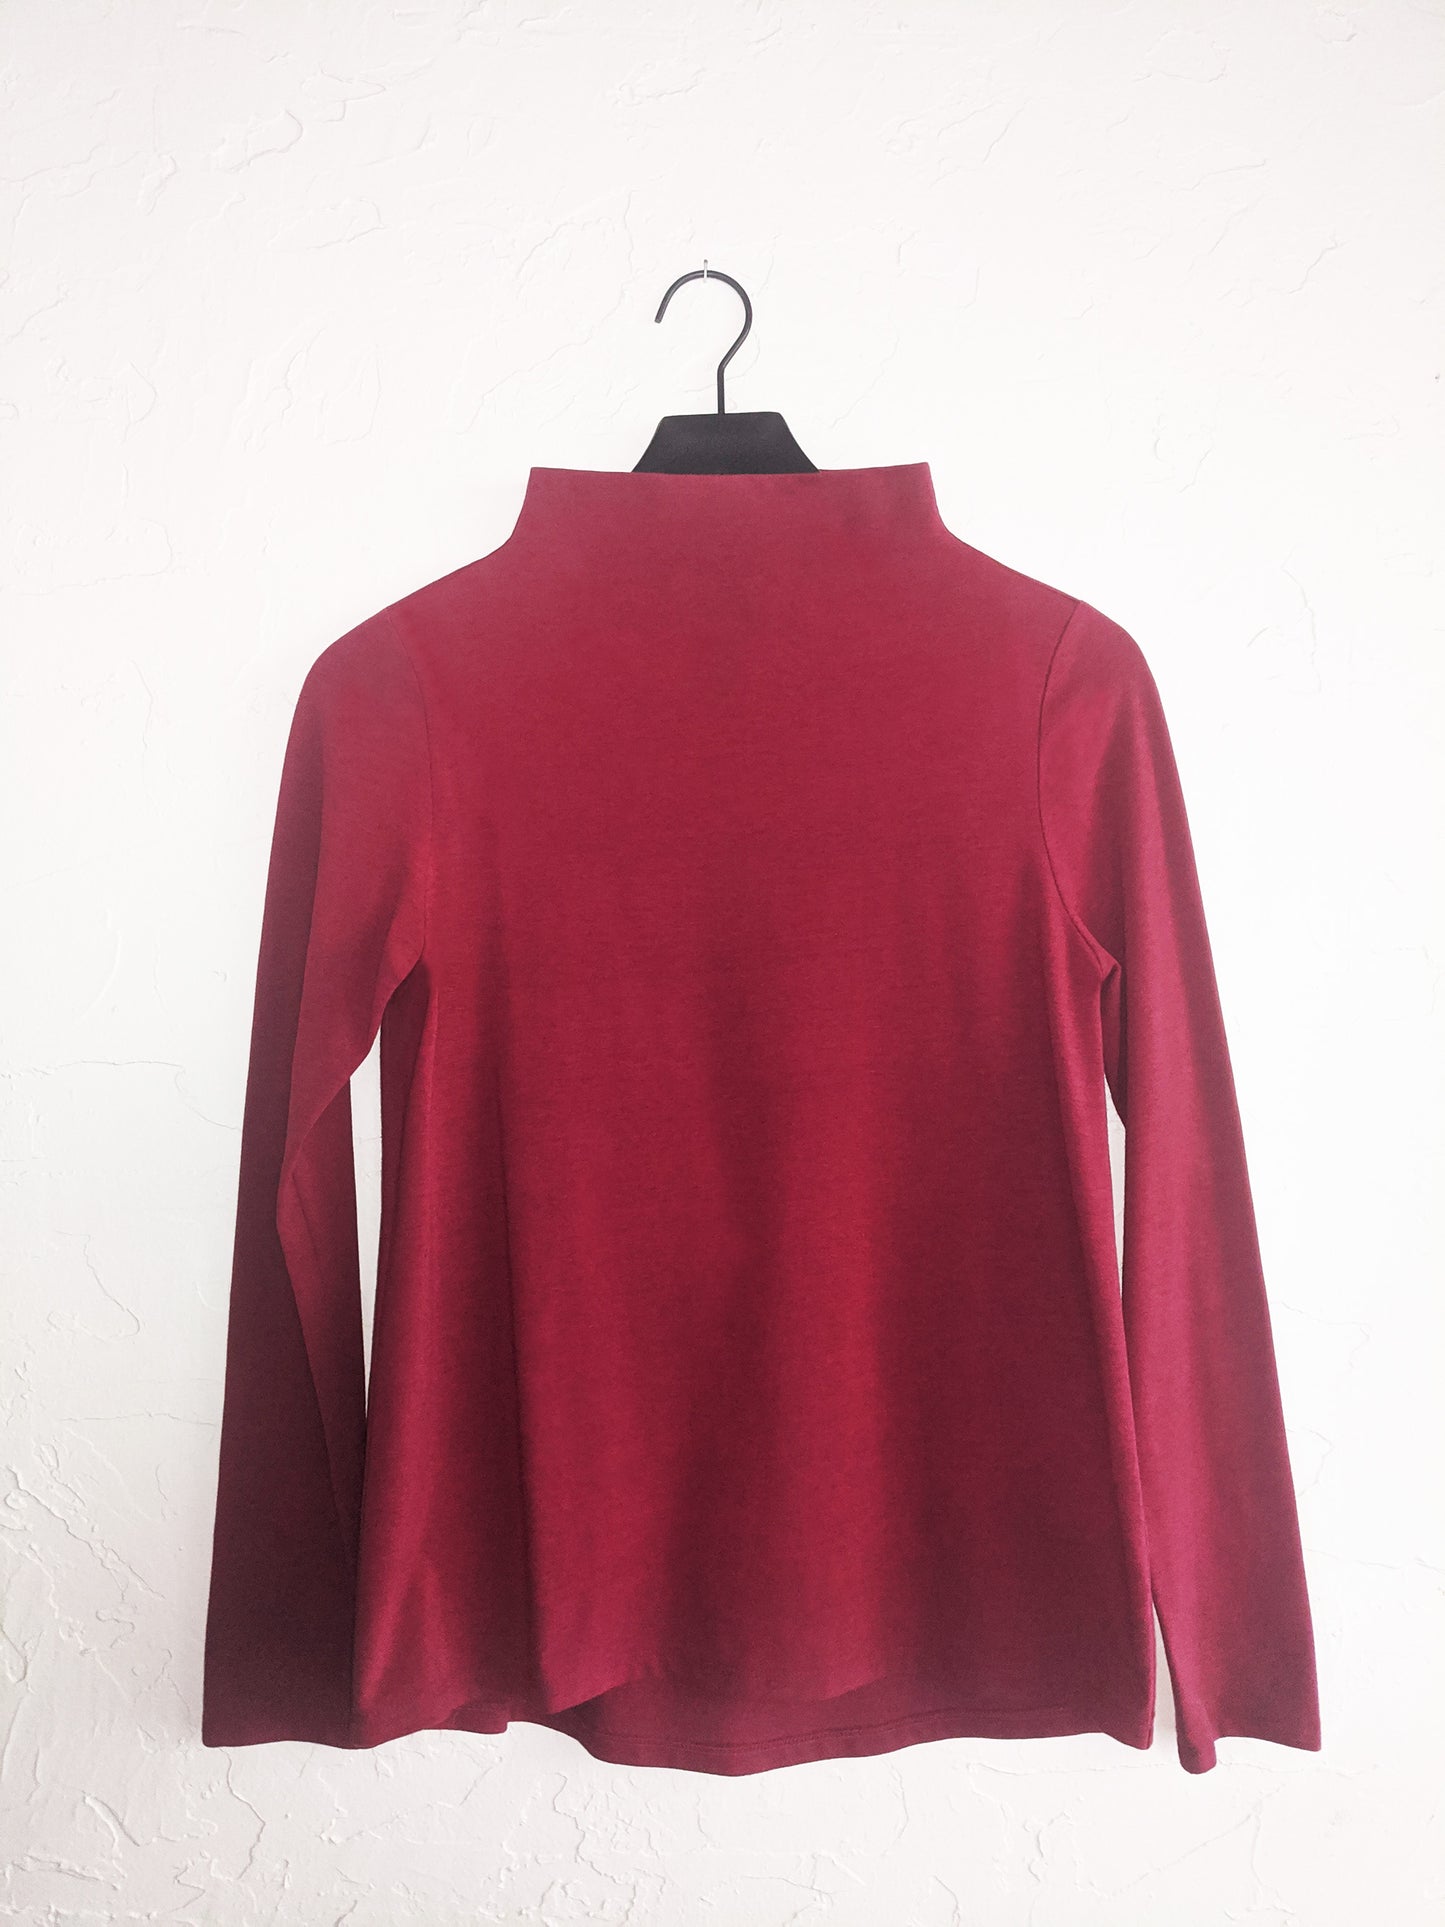 The T-Neck Soy/Cotton Jersey Top